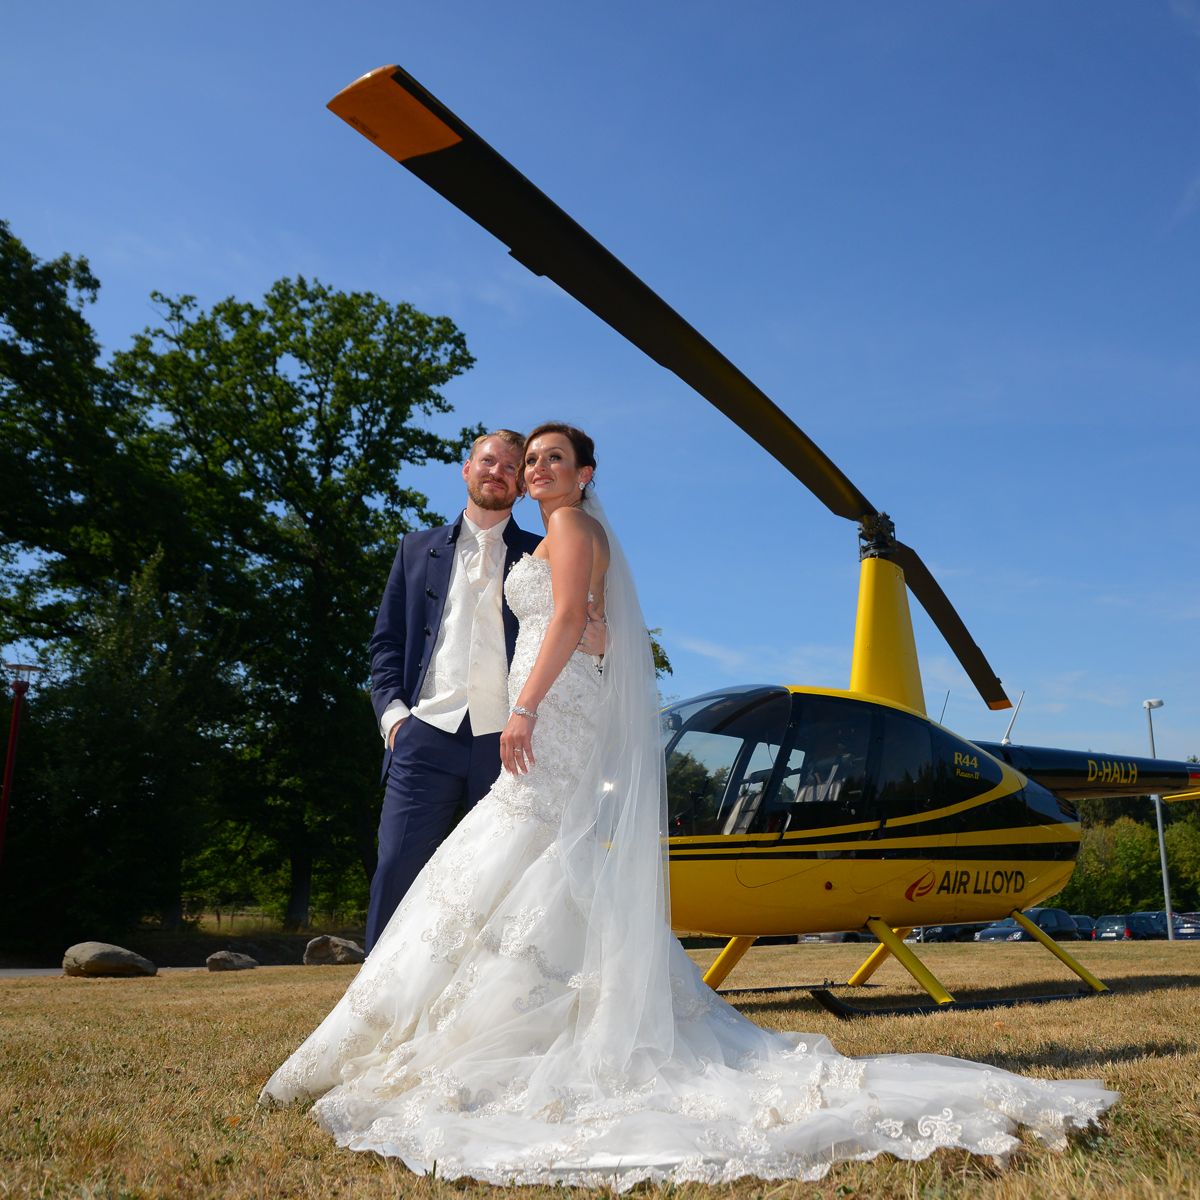 A bride and groom stand in front of a yellow AirLloyd helicopter.